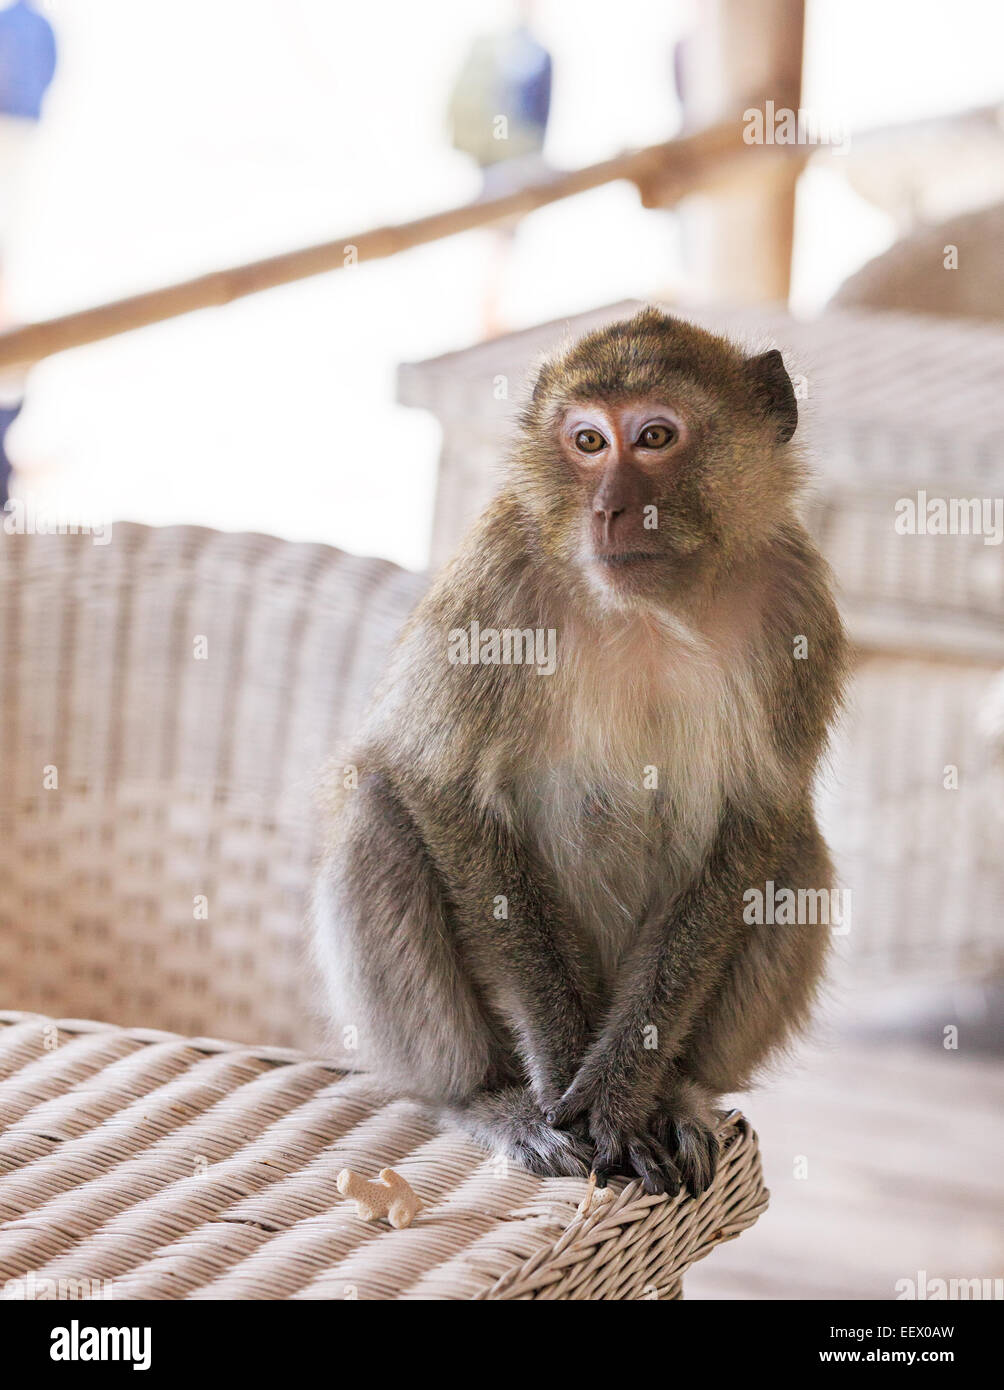 Monkey portrait sitting on a table on light blurred background Stock Photo